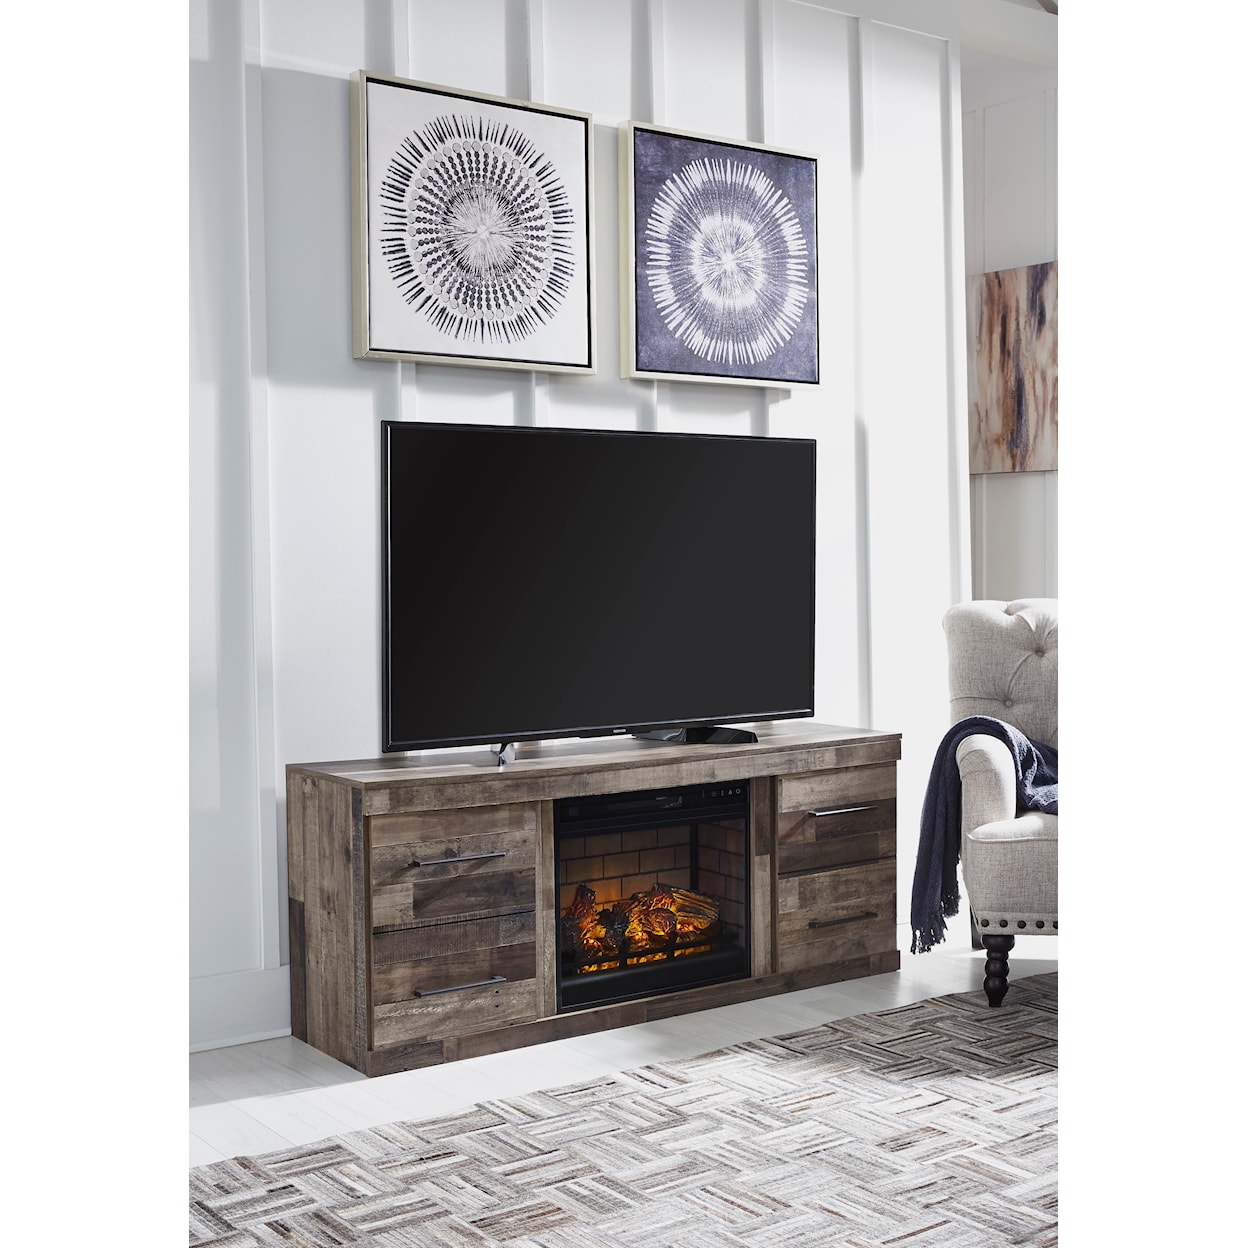 Signature Design by Ashley Derekson 60" TV Stand with Electric Fireplace